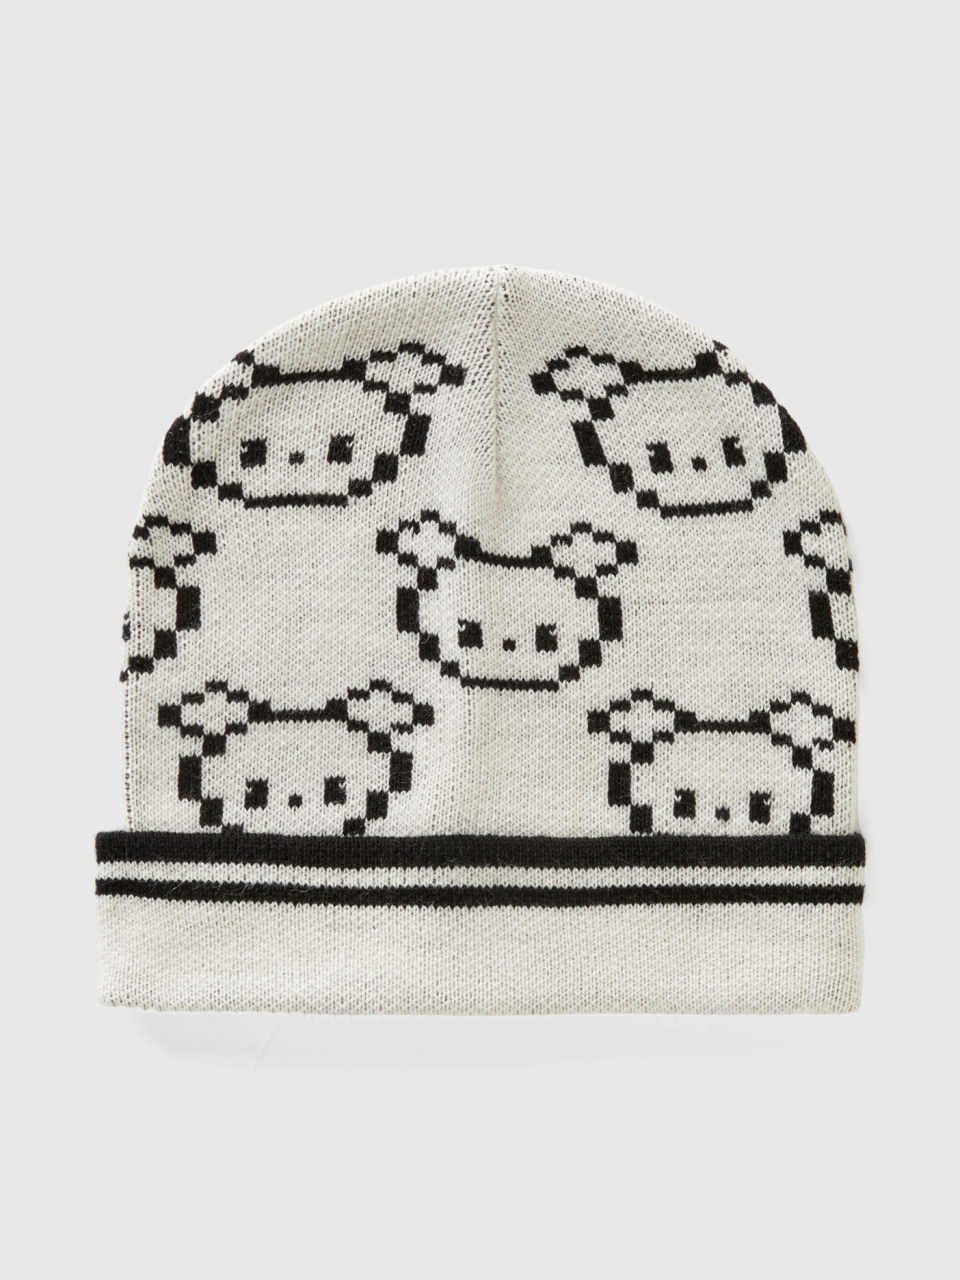 Benetton, Knitted Hat With Animal Pattern, White, Kids